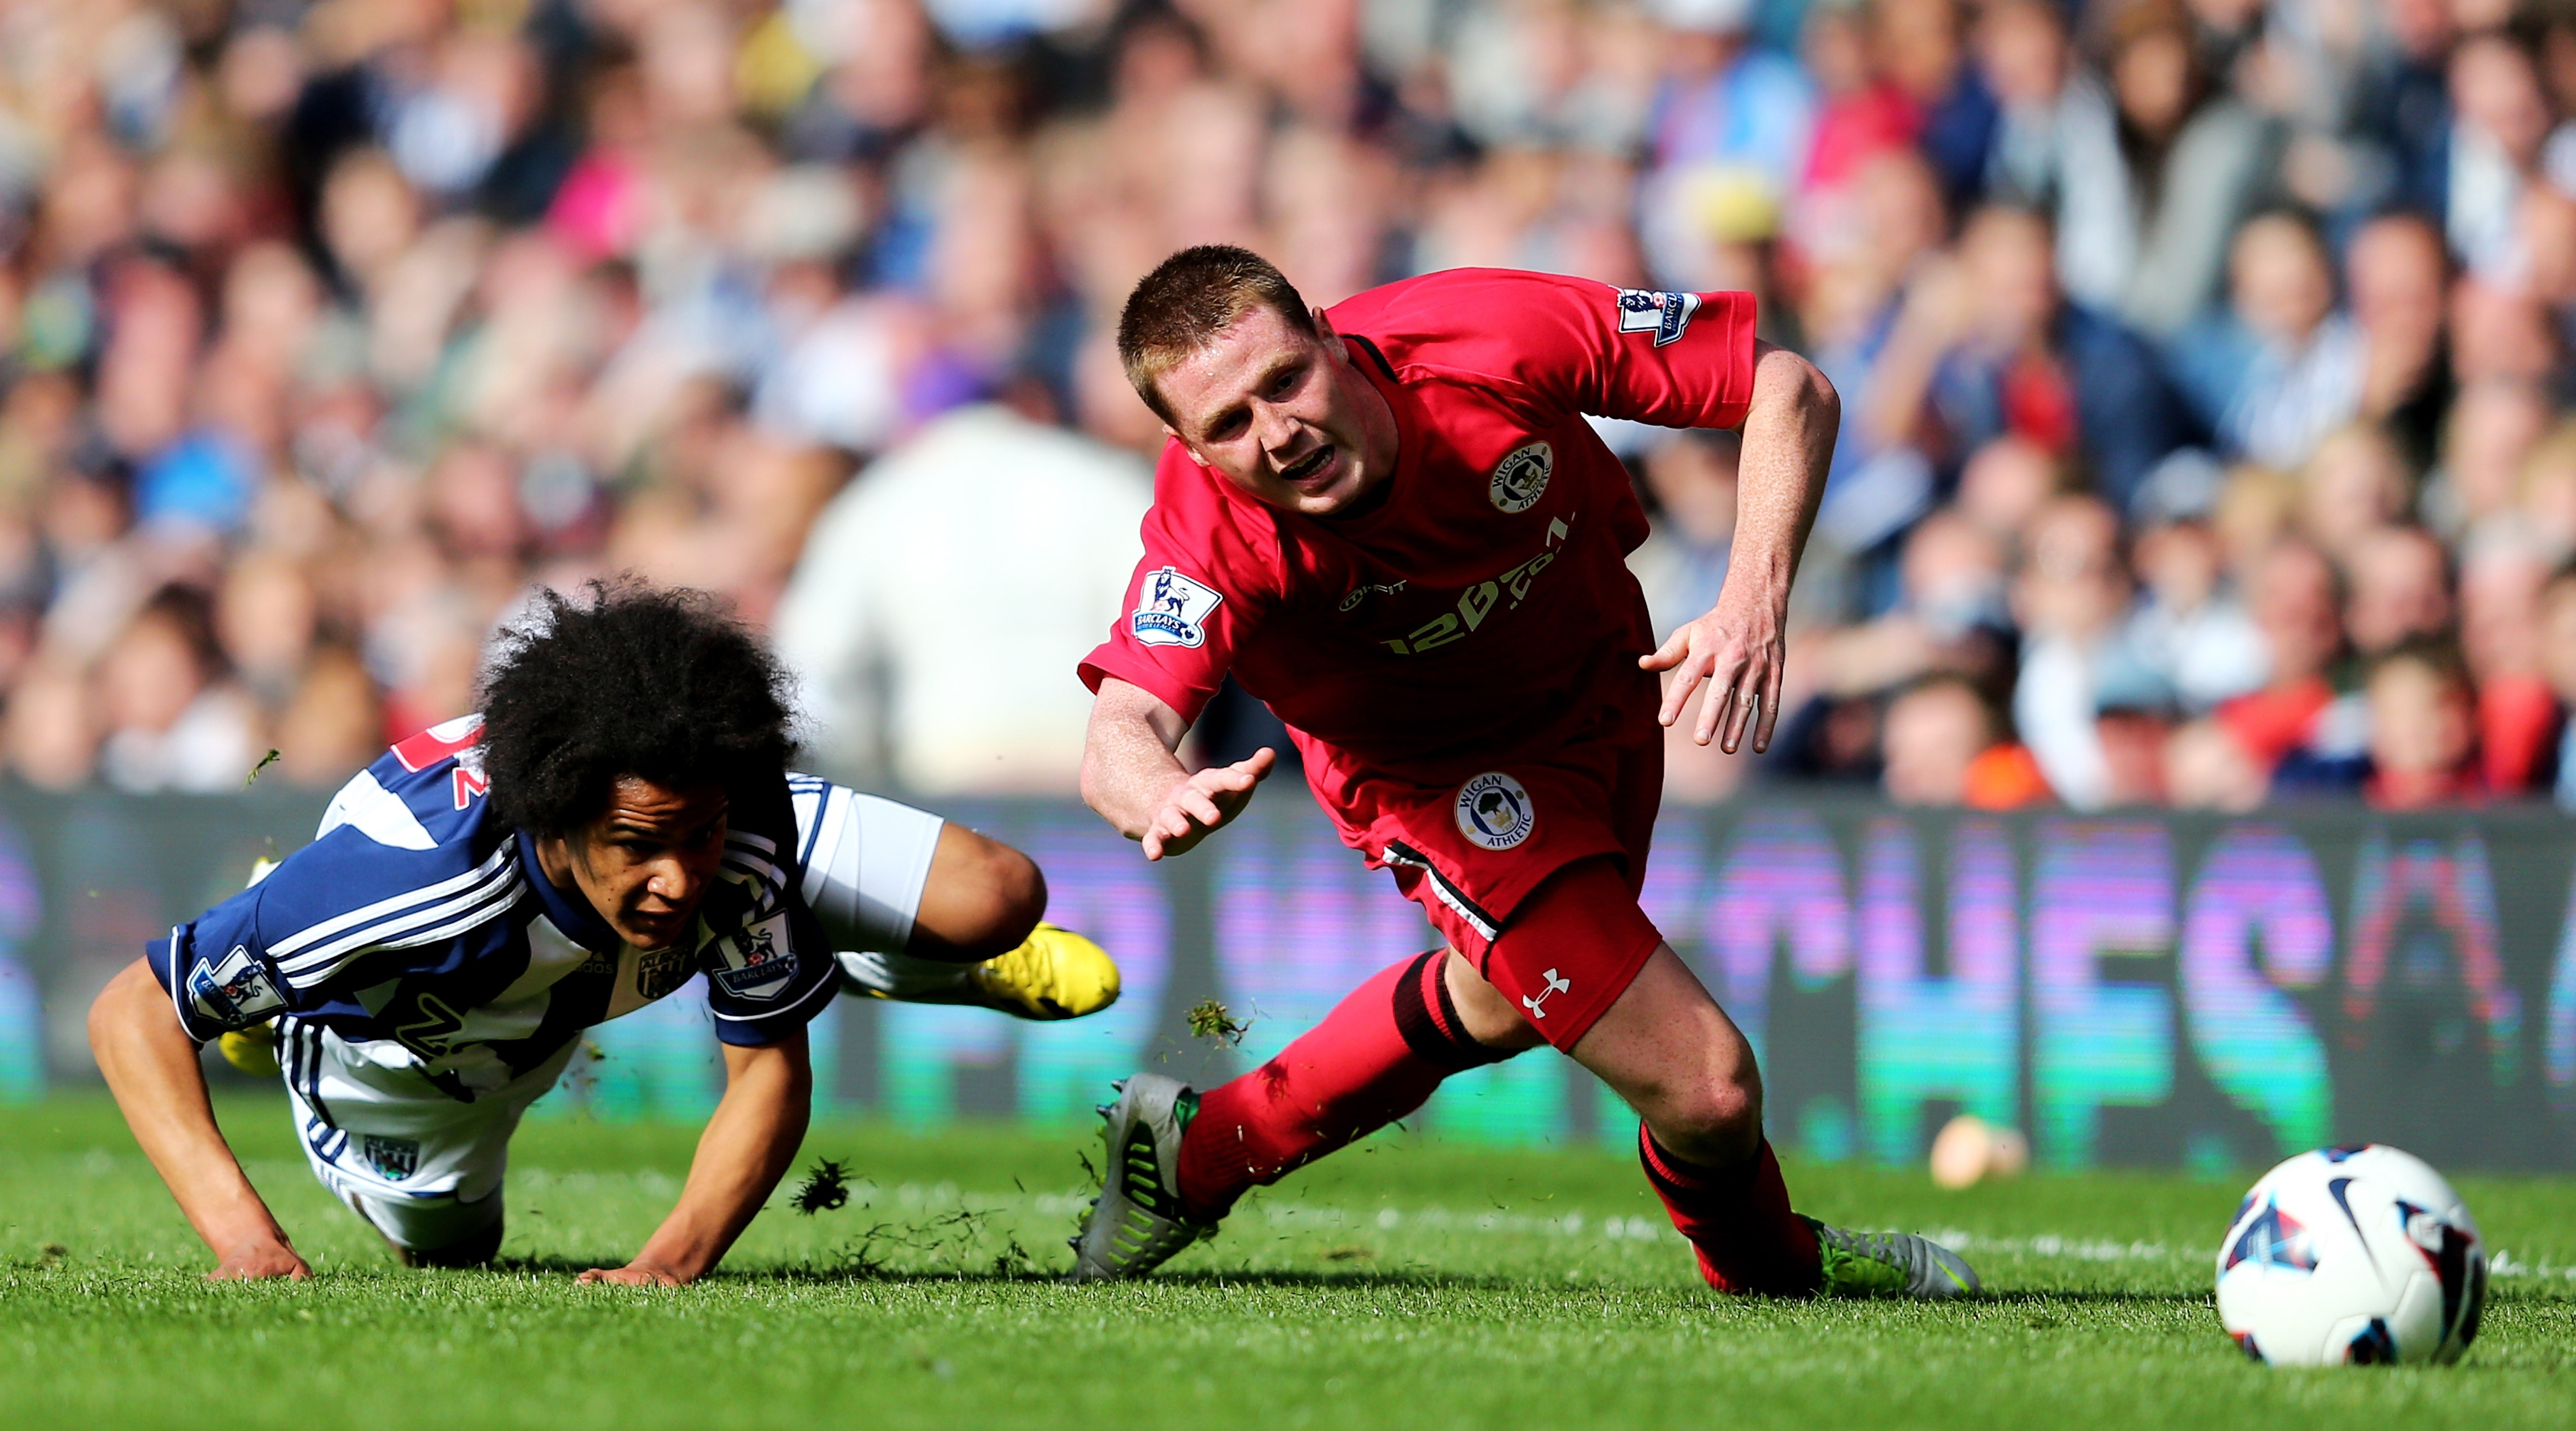 Shaun Maloney of Wigan is brought down by Isaiah Brown of West Bromwich during the Premier League match between West Bromwich Albion and Wigan Athletic at The Hawthorns on May 4, 2013 in West Bromwich, England.